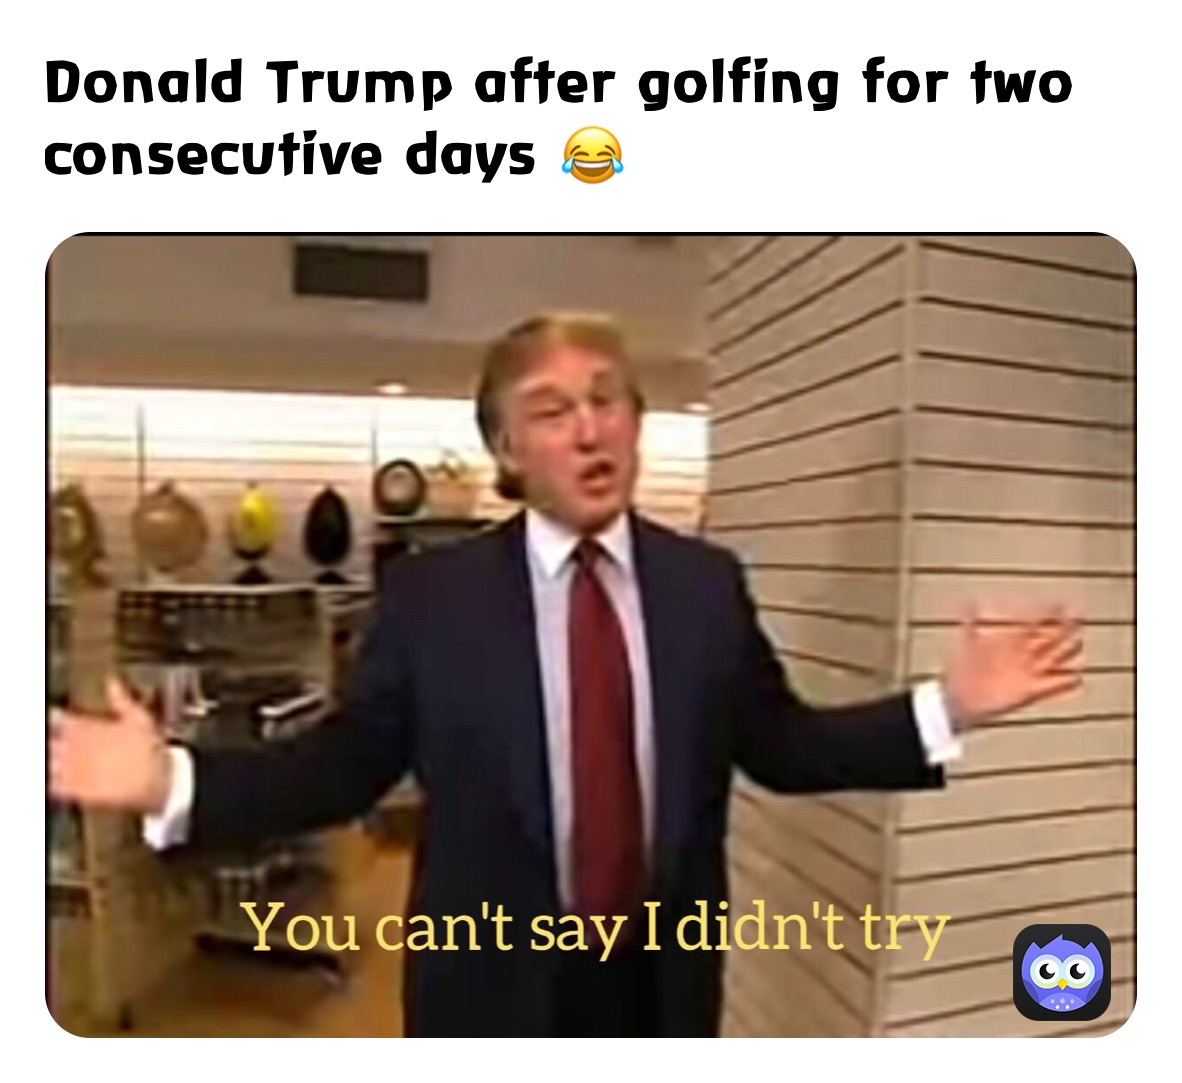 Donald Trump after golfing for two consecutive days 😂 